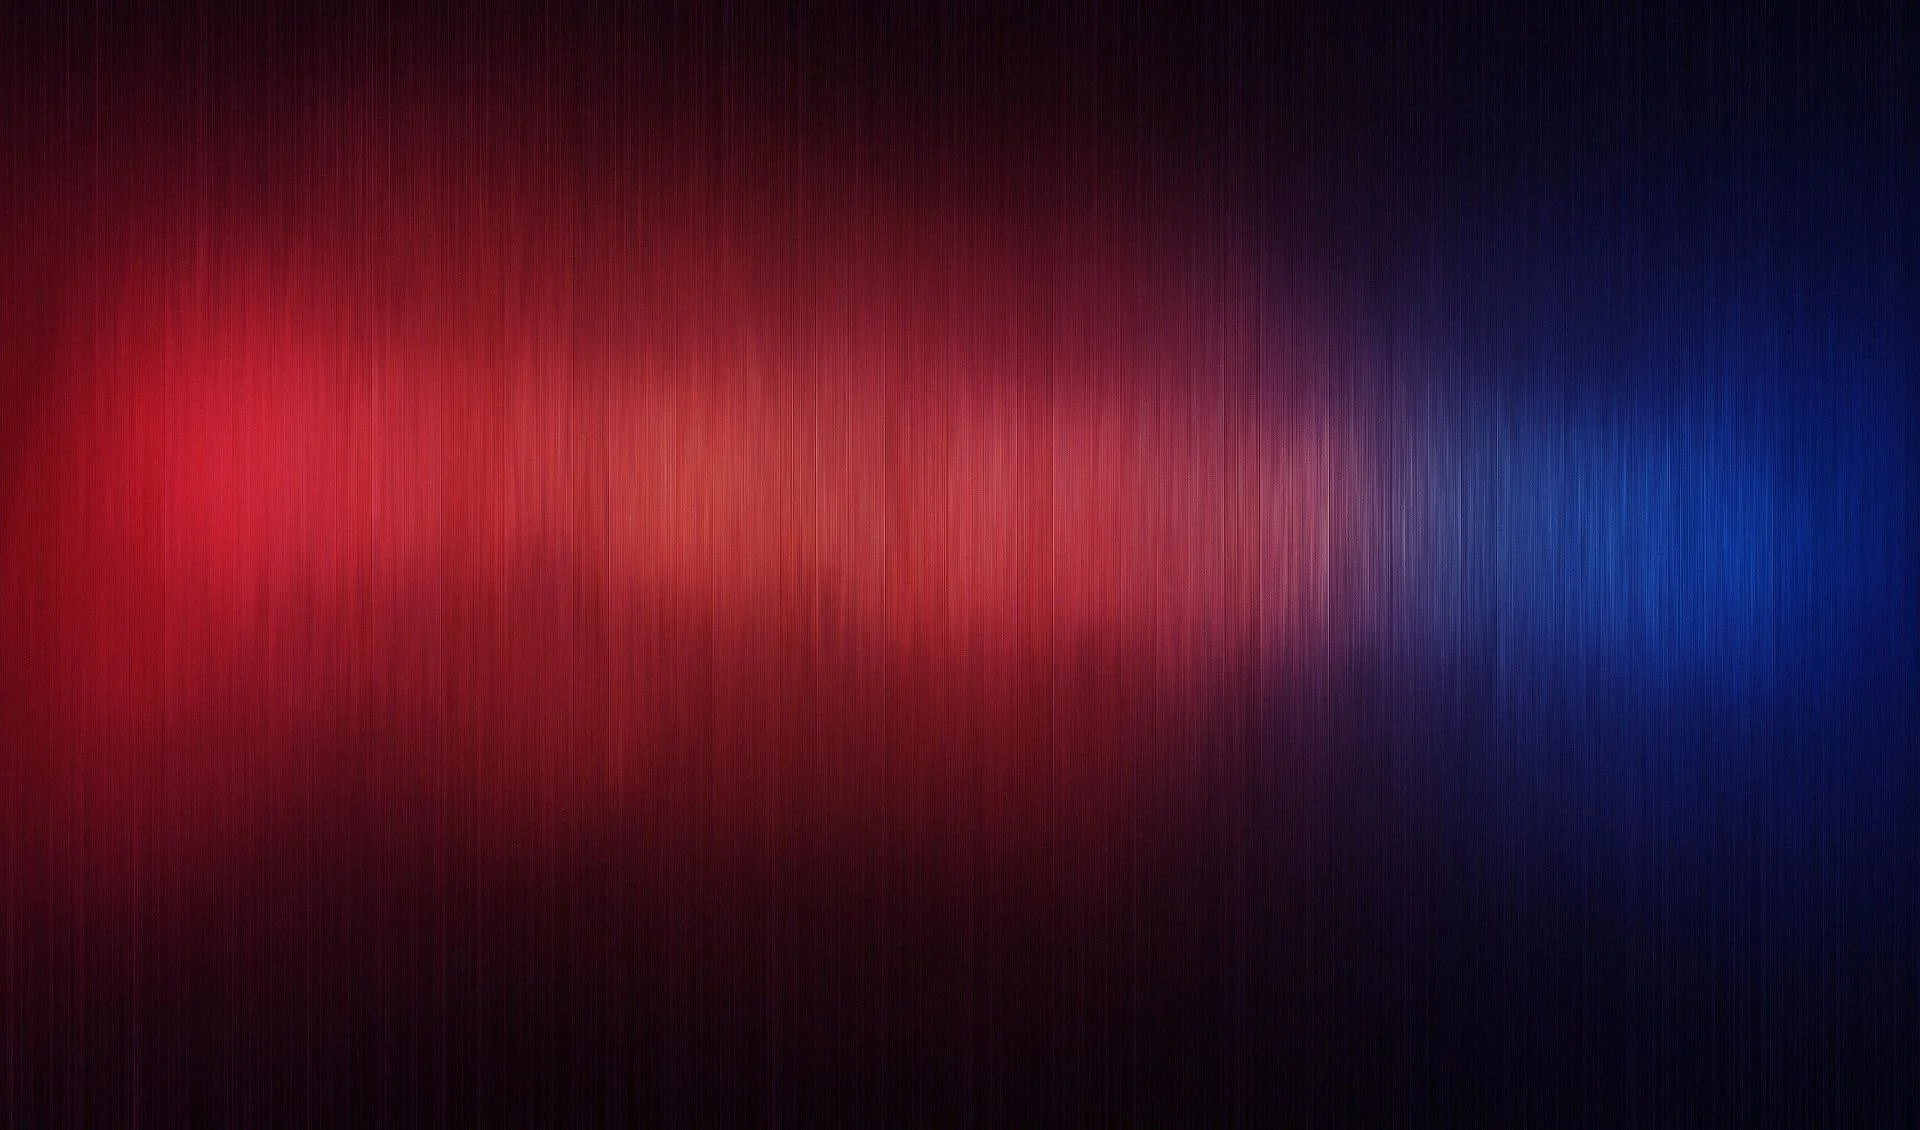 … blue and red fibers wallpapers hd download …